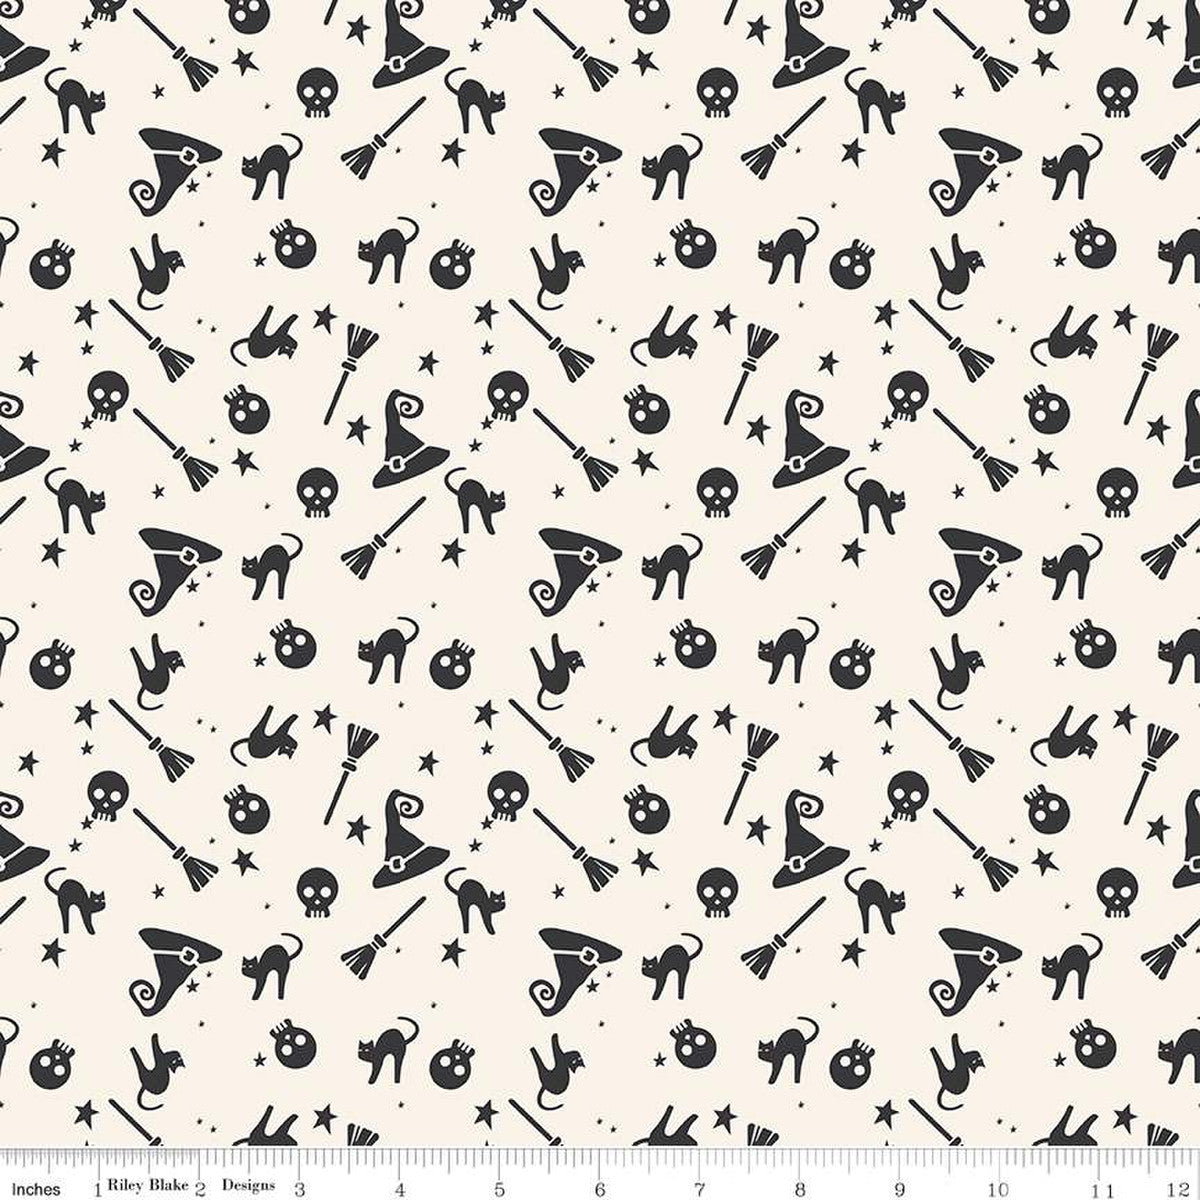 Hey Bootiful Plaid Offwhite Halloween Basic Background Riley Blake Designs black halloween icons witch hat skeleton cat broom star on off white background cotton quilt weight material fabric